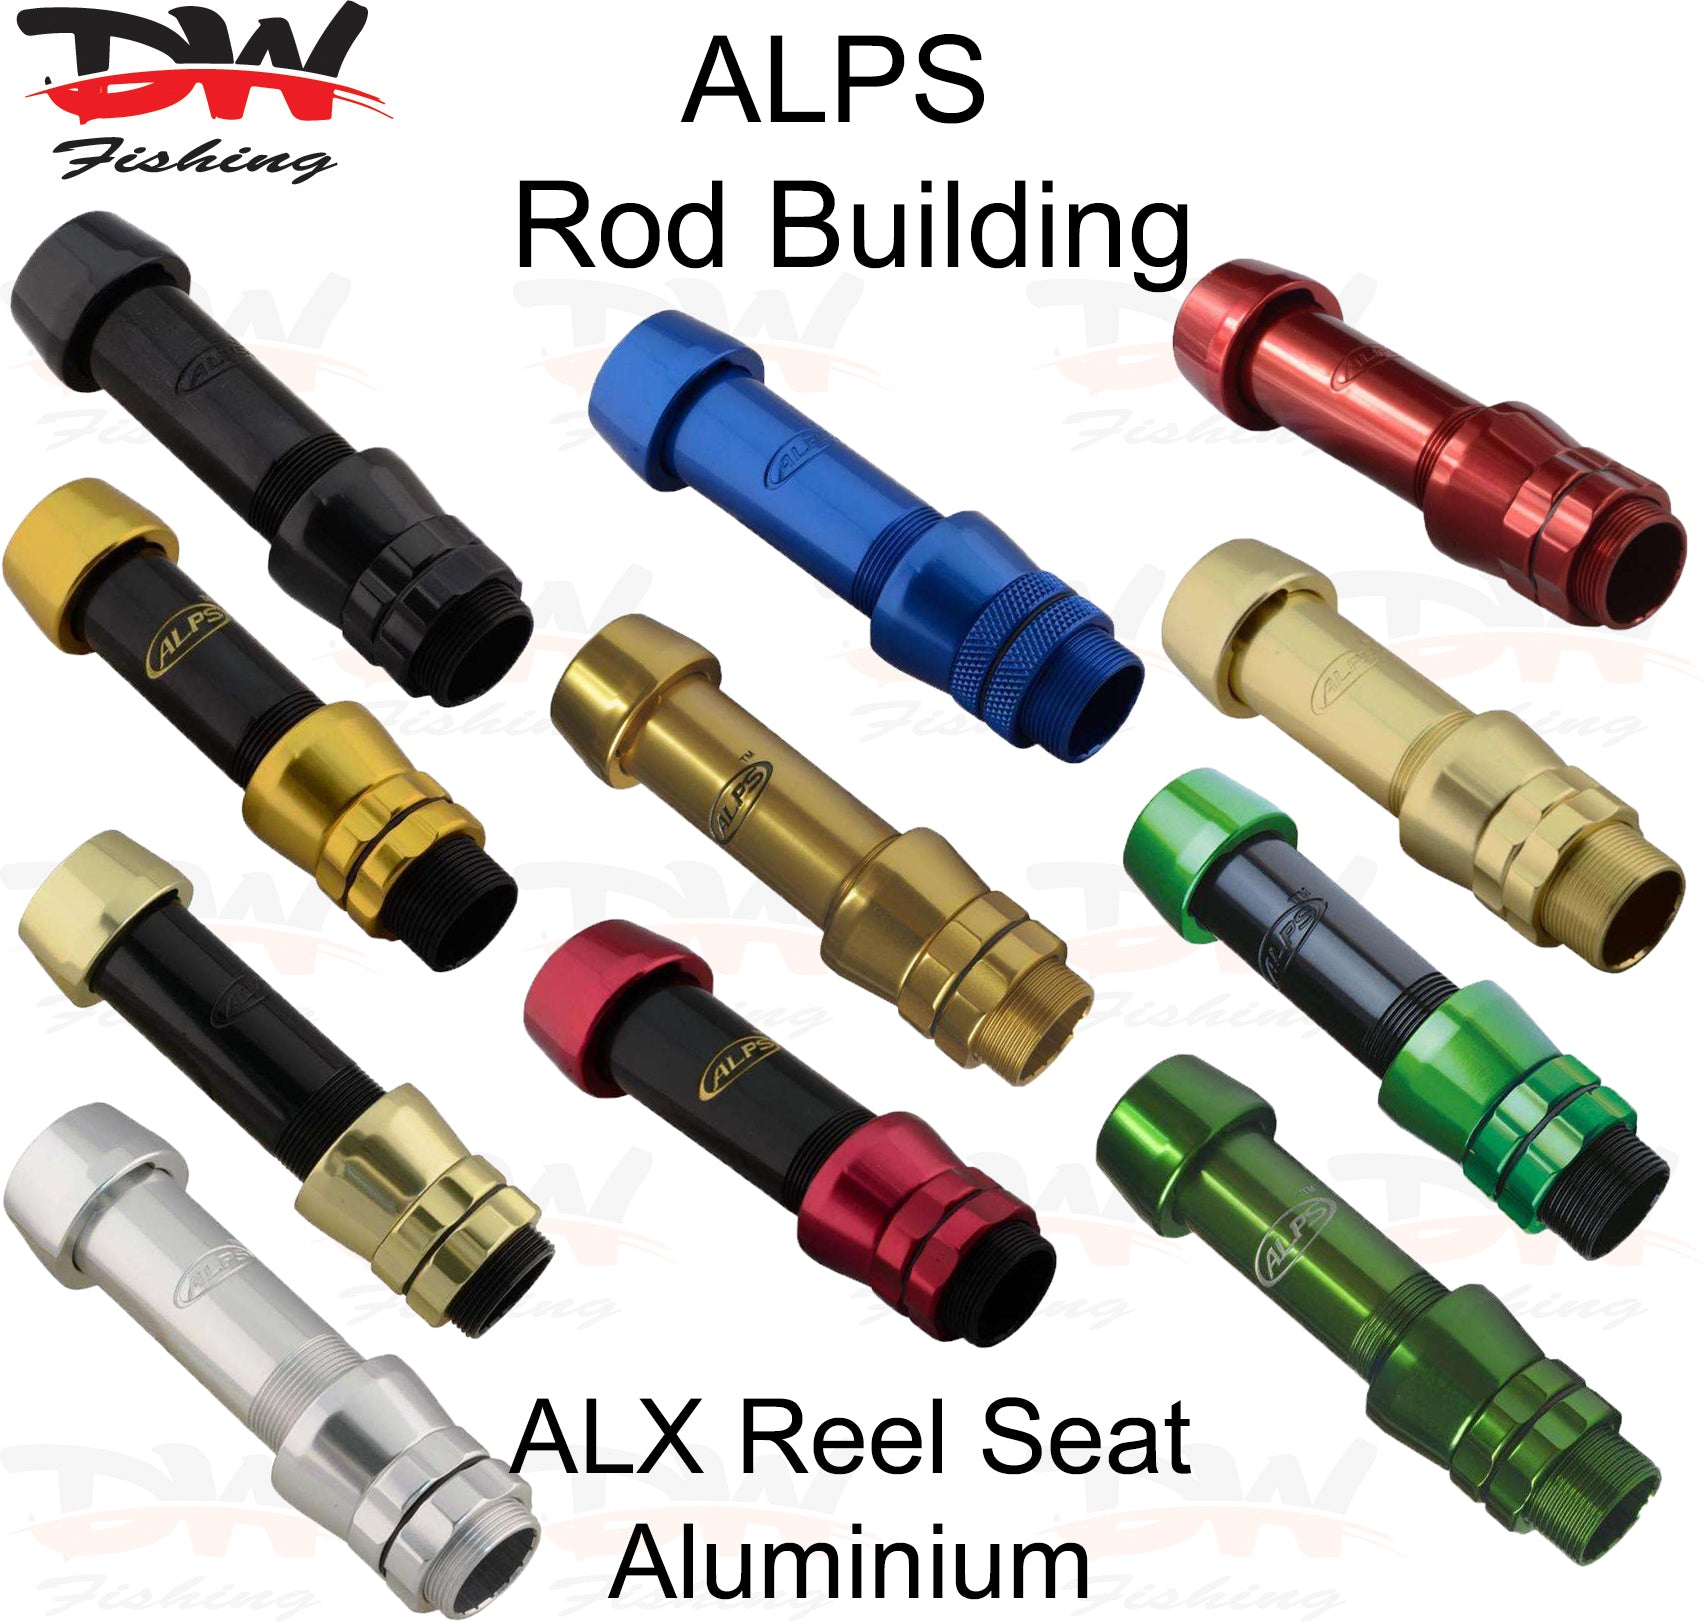 ALPS ALX Alloy Reel seat 12 colour options group 